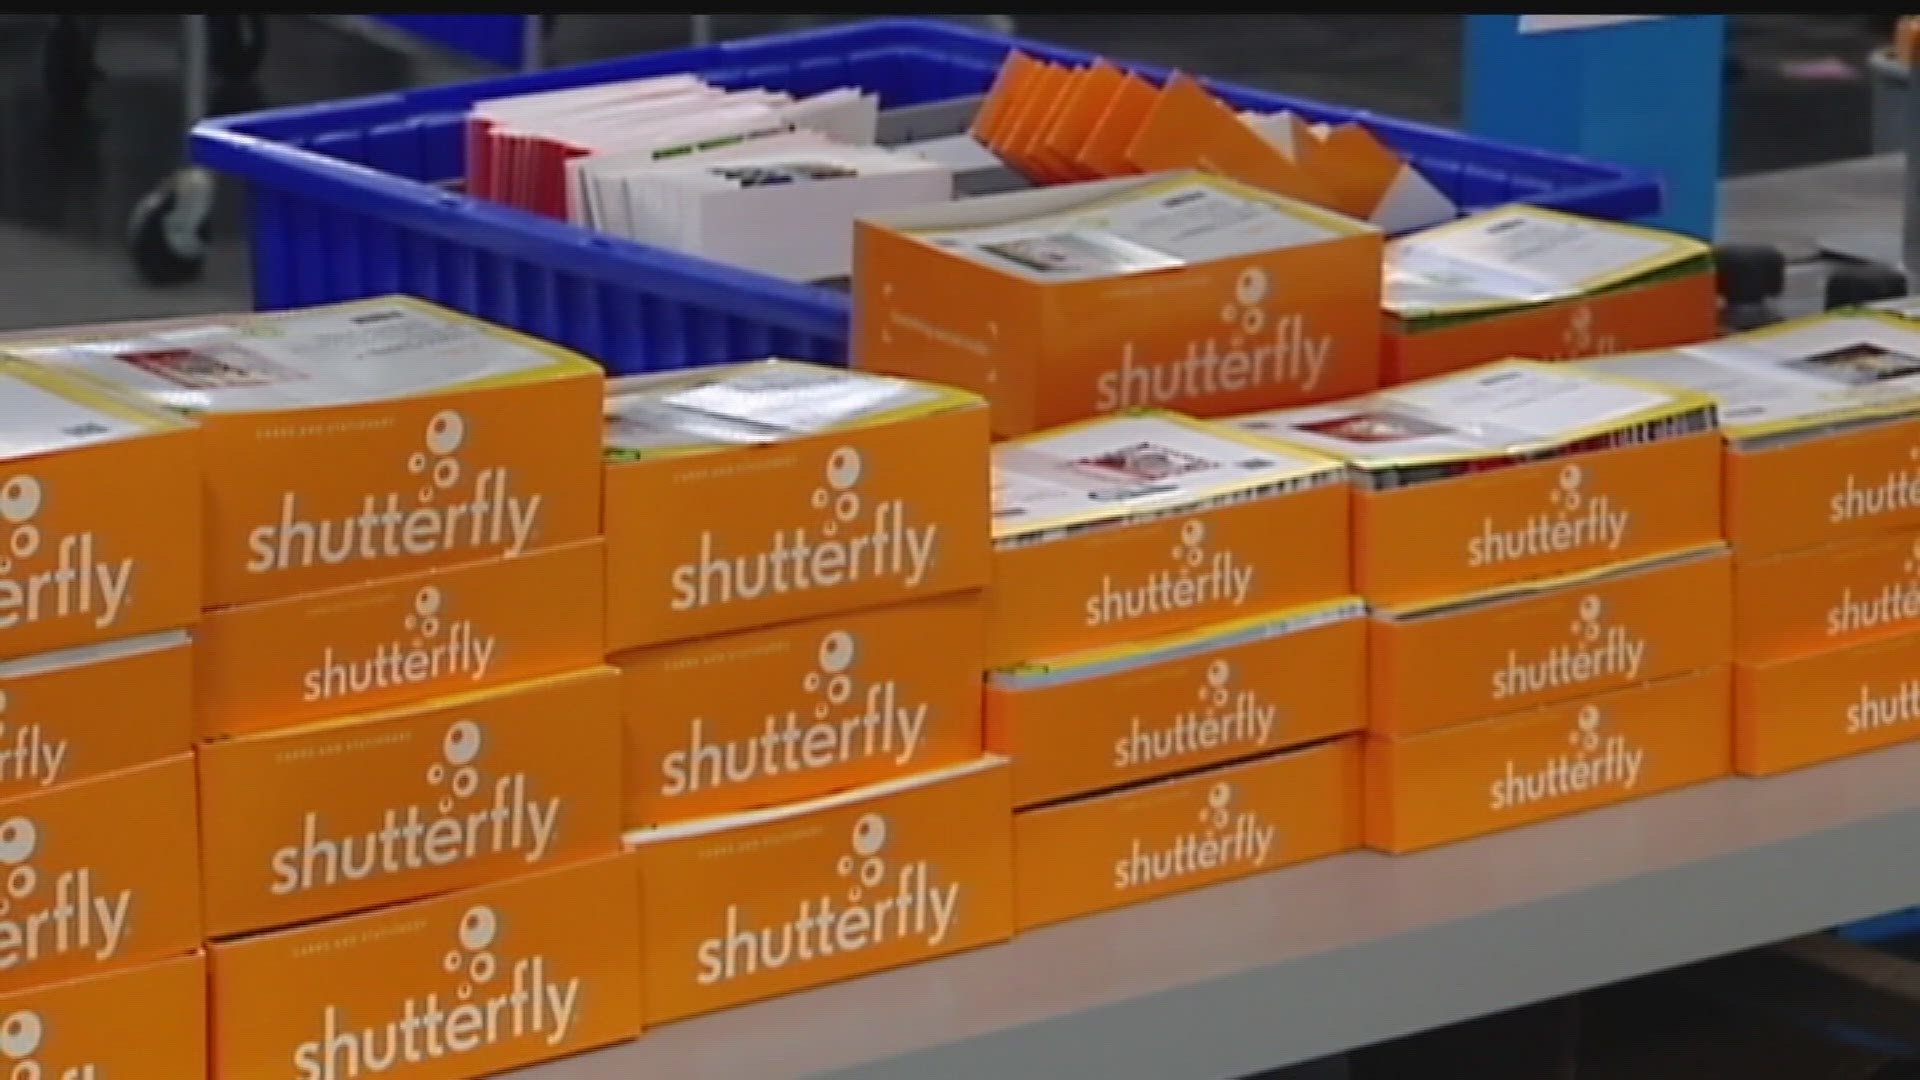 Shutterfly Partners With Marie Kondo on an Exclusive Product Collaboration  a First for the Brand  SHUTTERFLY